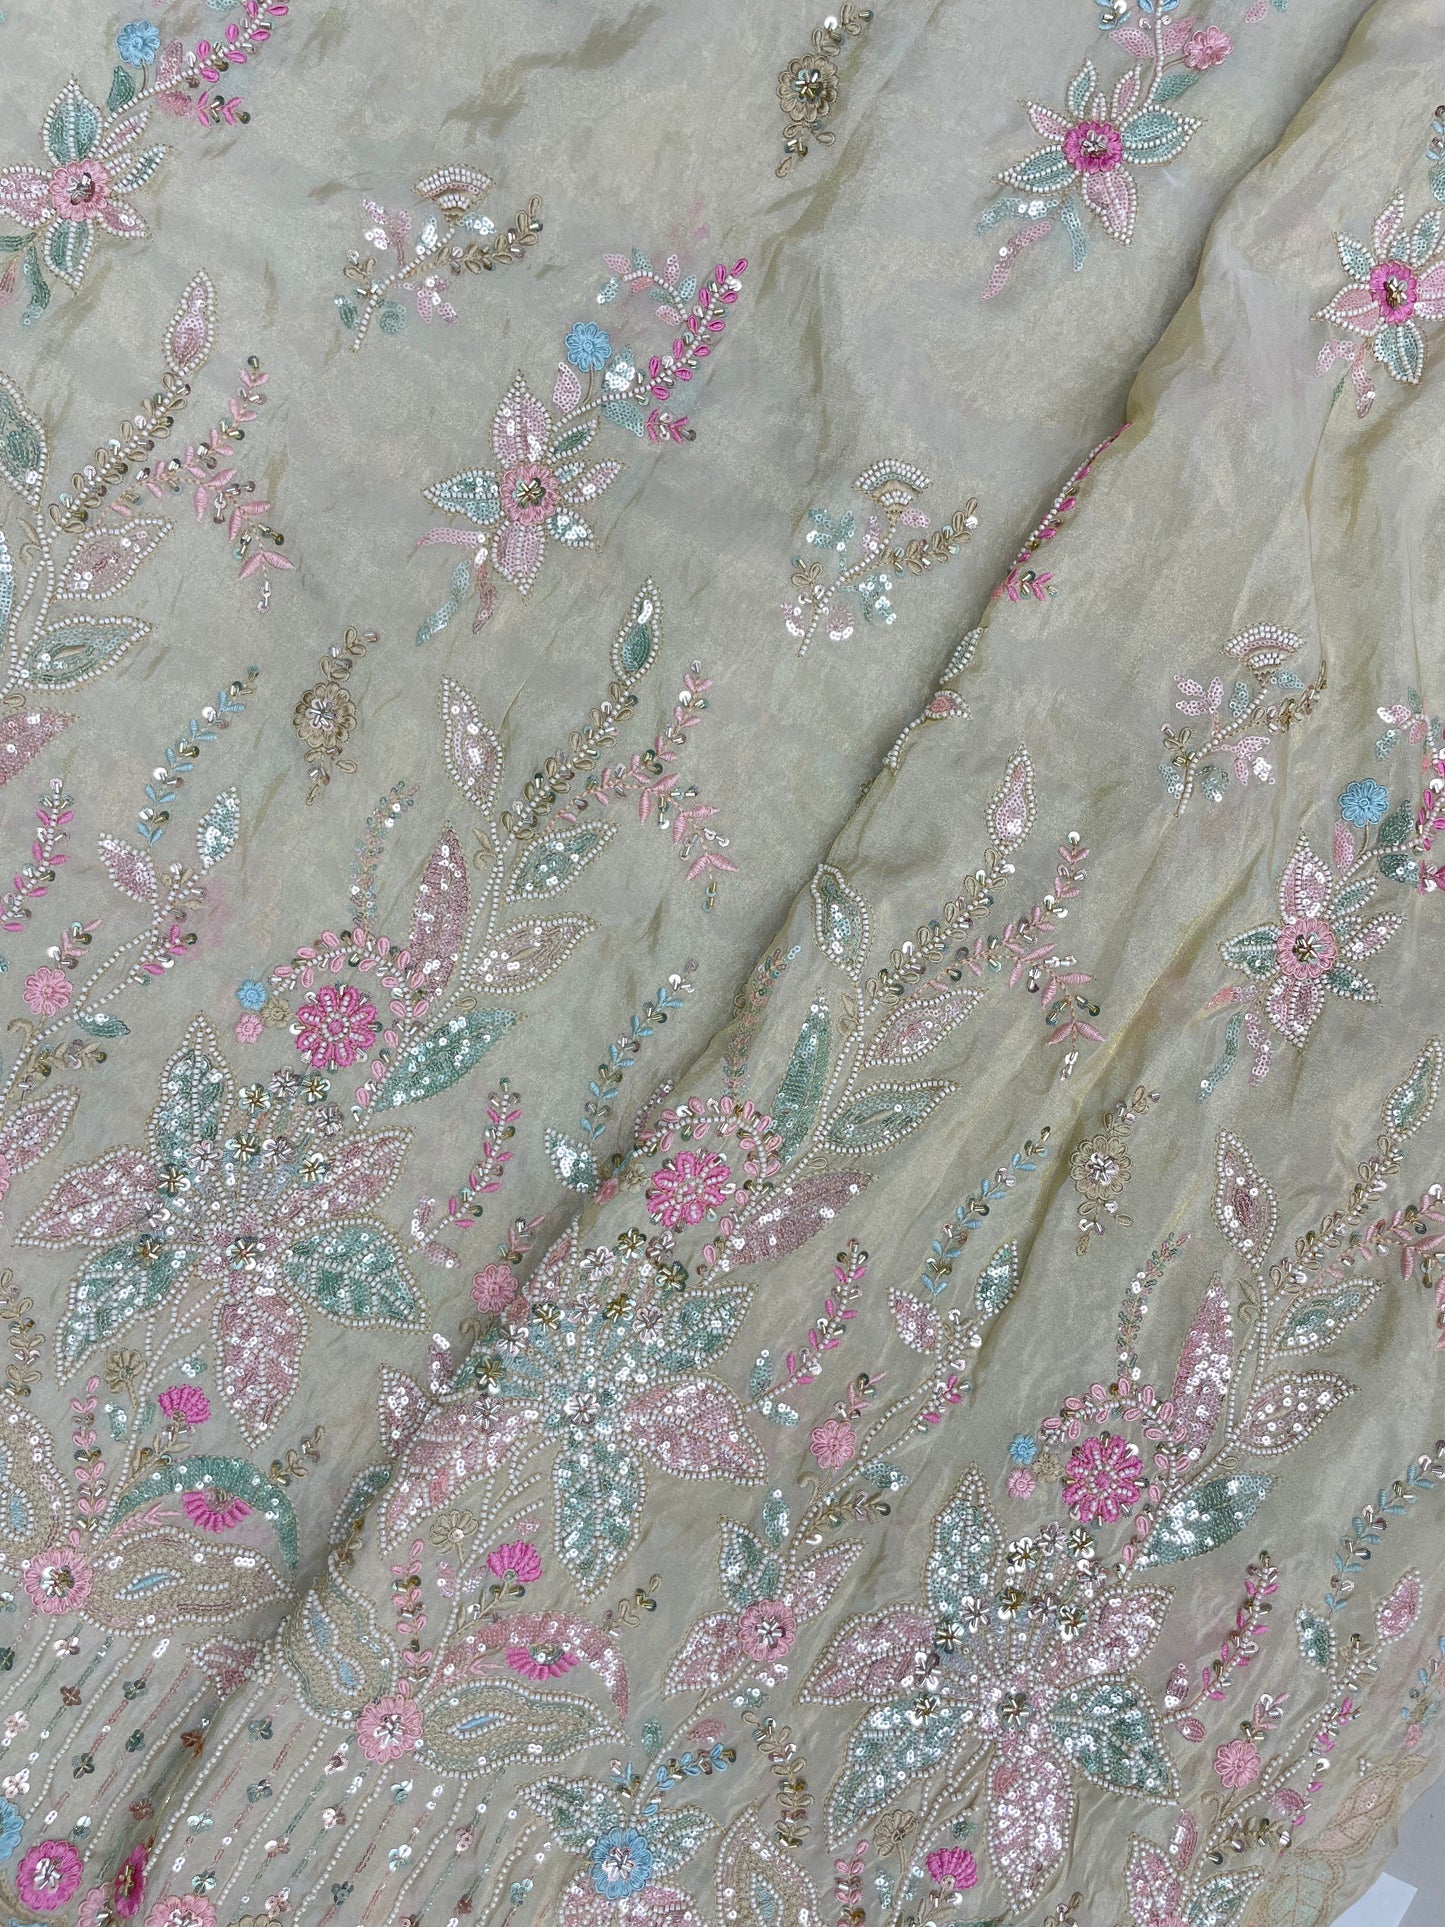 Delicate Gorgeous Floral Multi Color Thread Embroidery With Cut Dana And Multi Color Sequin Work On Tissue Fabric